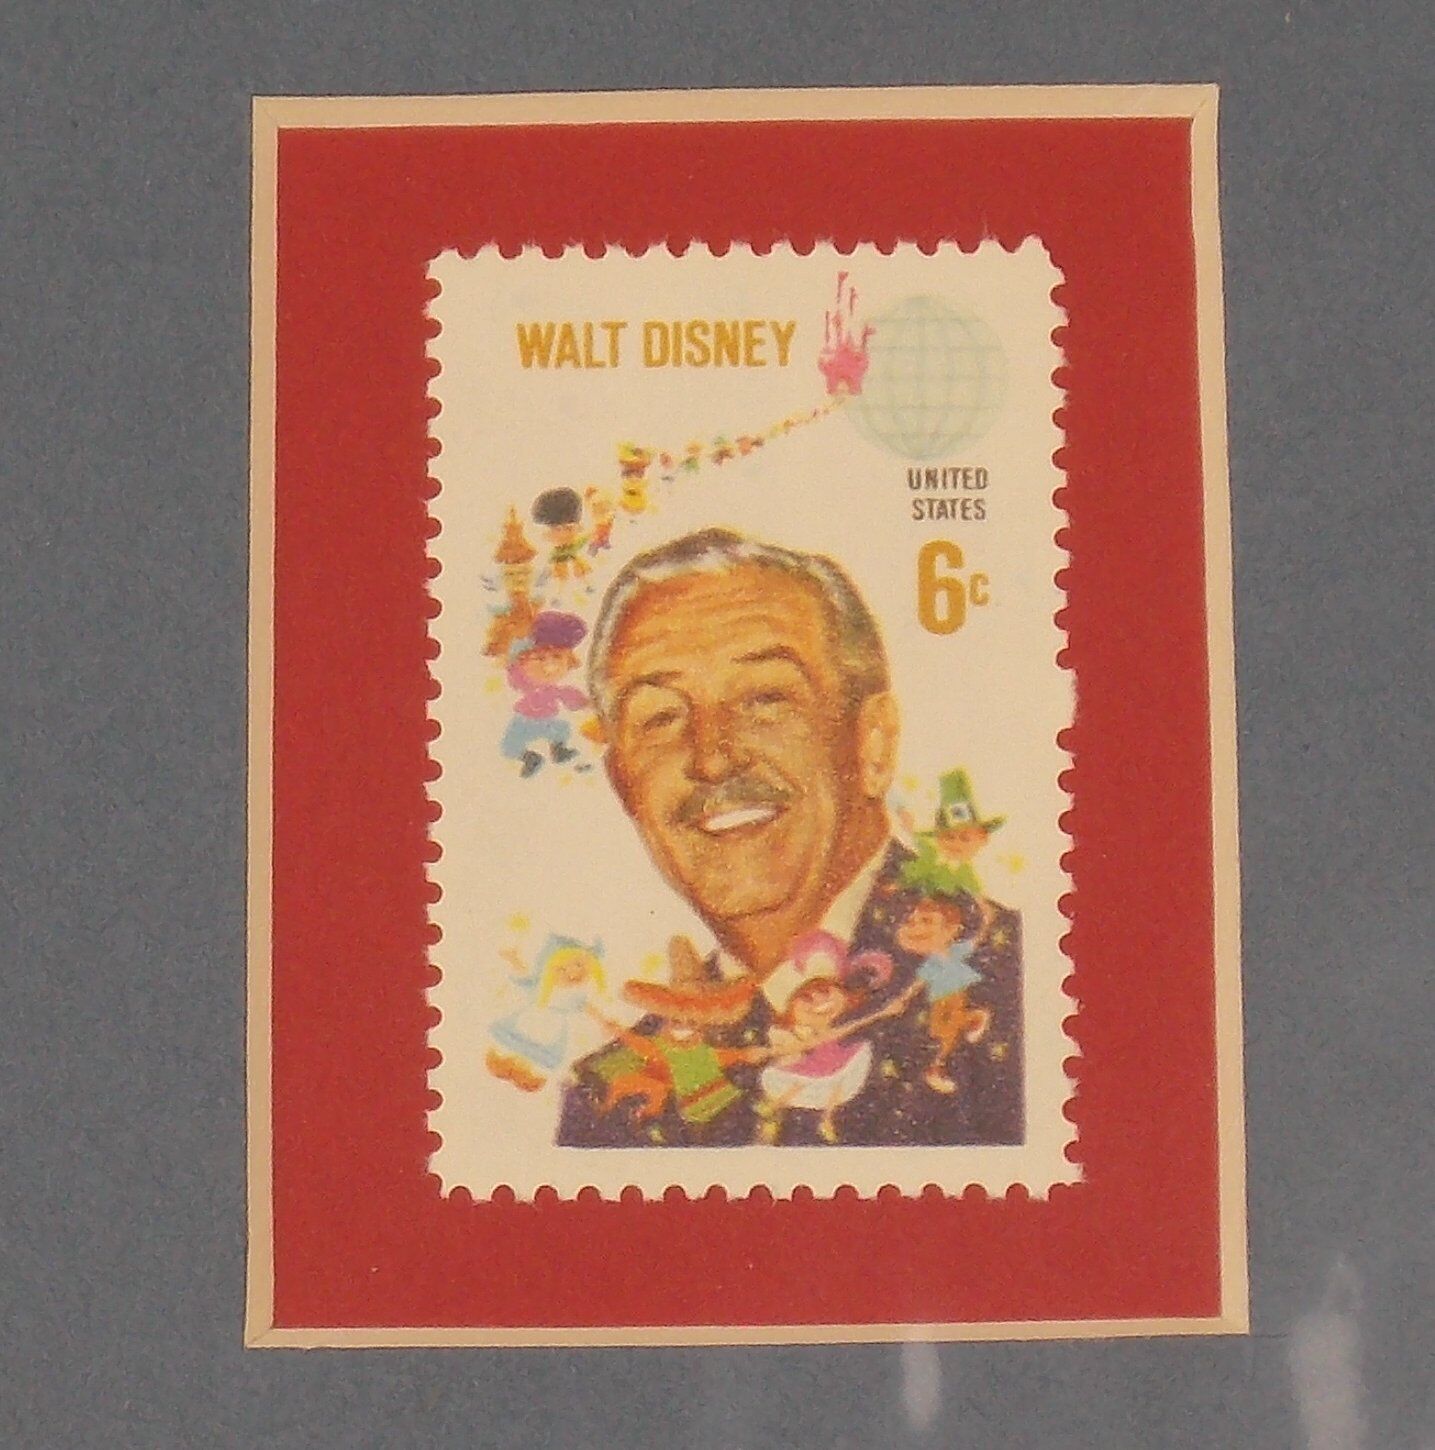 Walt Disney 6 Cent USA Stamps Mounted Winnie The Pooh Images Matted Set of 2 Без бренда - фотография #2